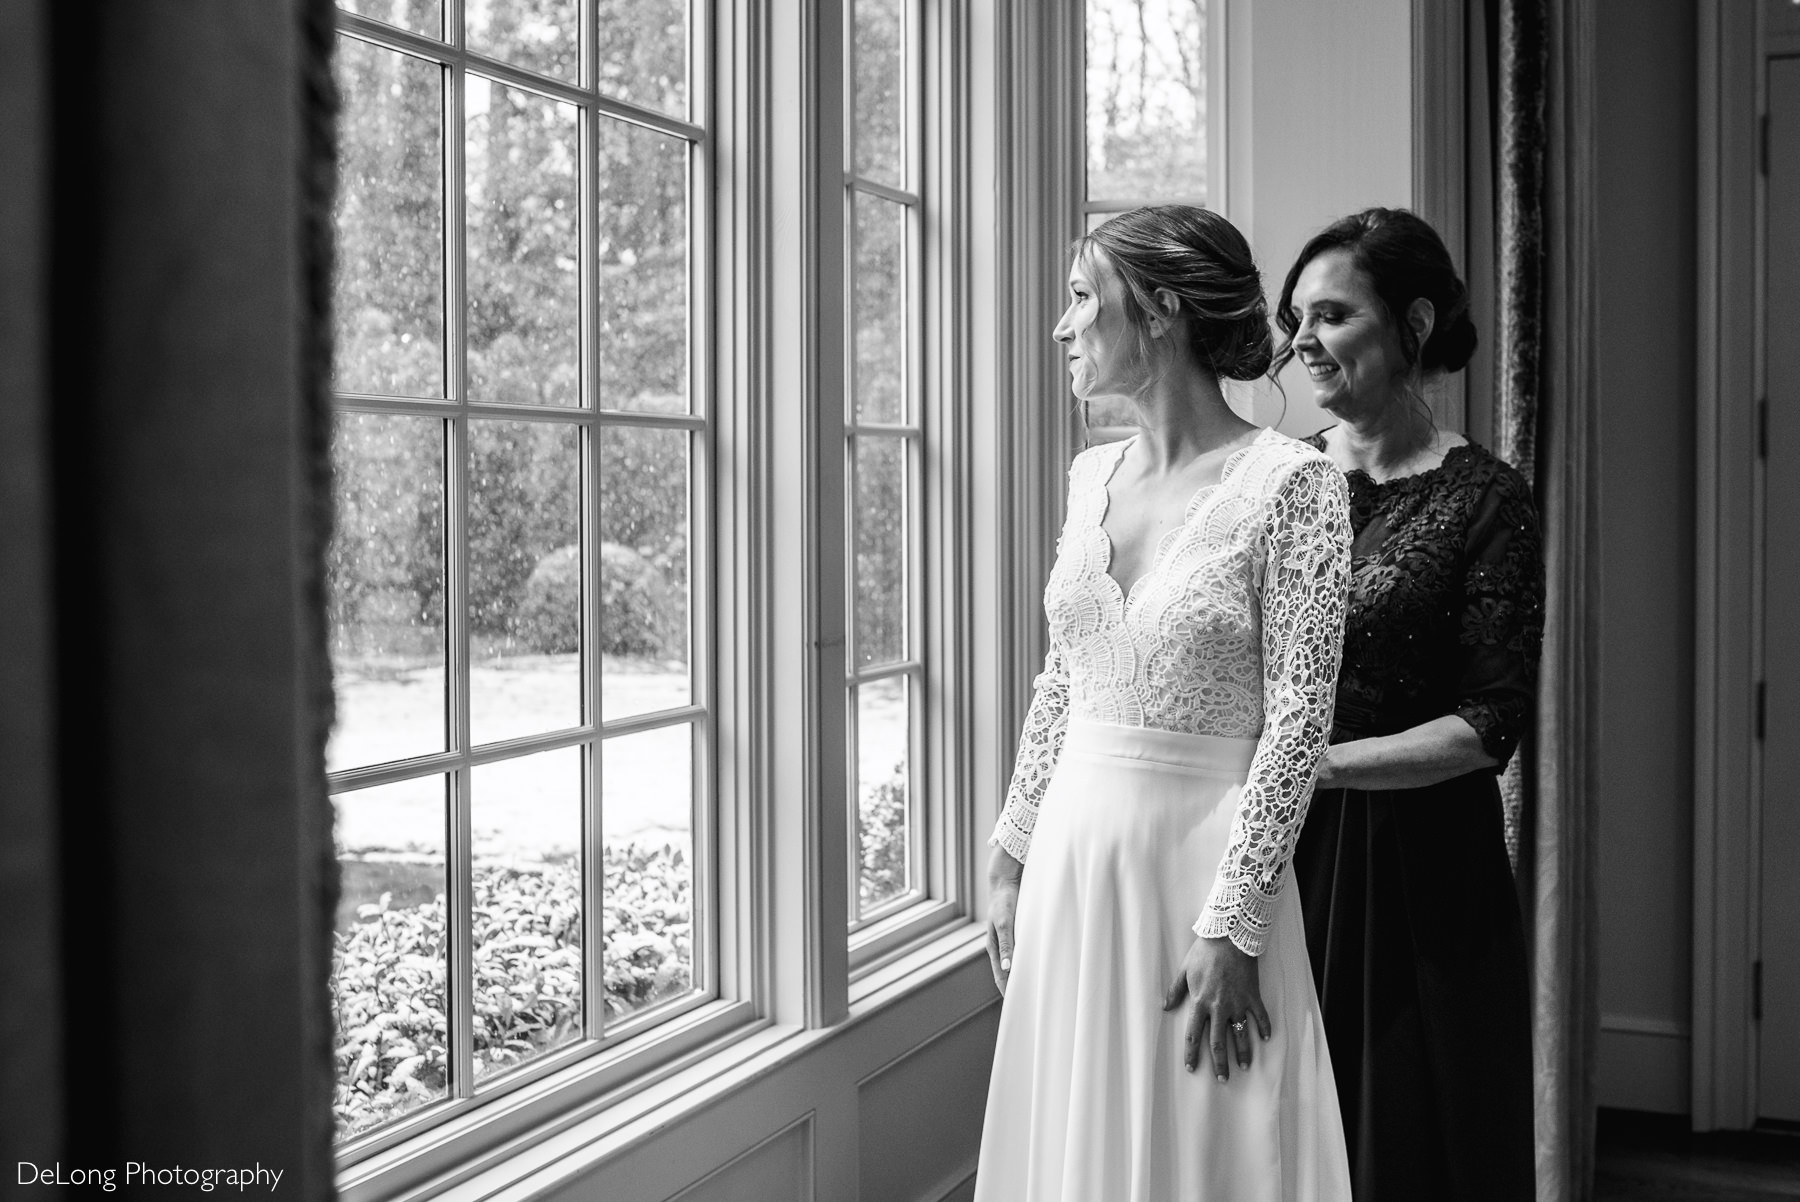 Black and white image of a bride looking out a window as her mother zips up her Lulus wedding dress by Charlotte wedding photographers DeLong Photography